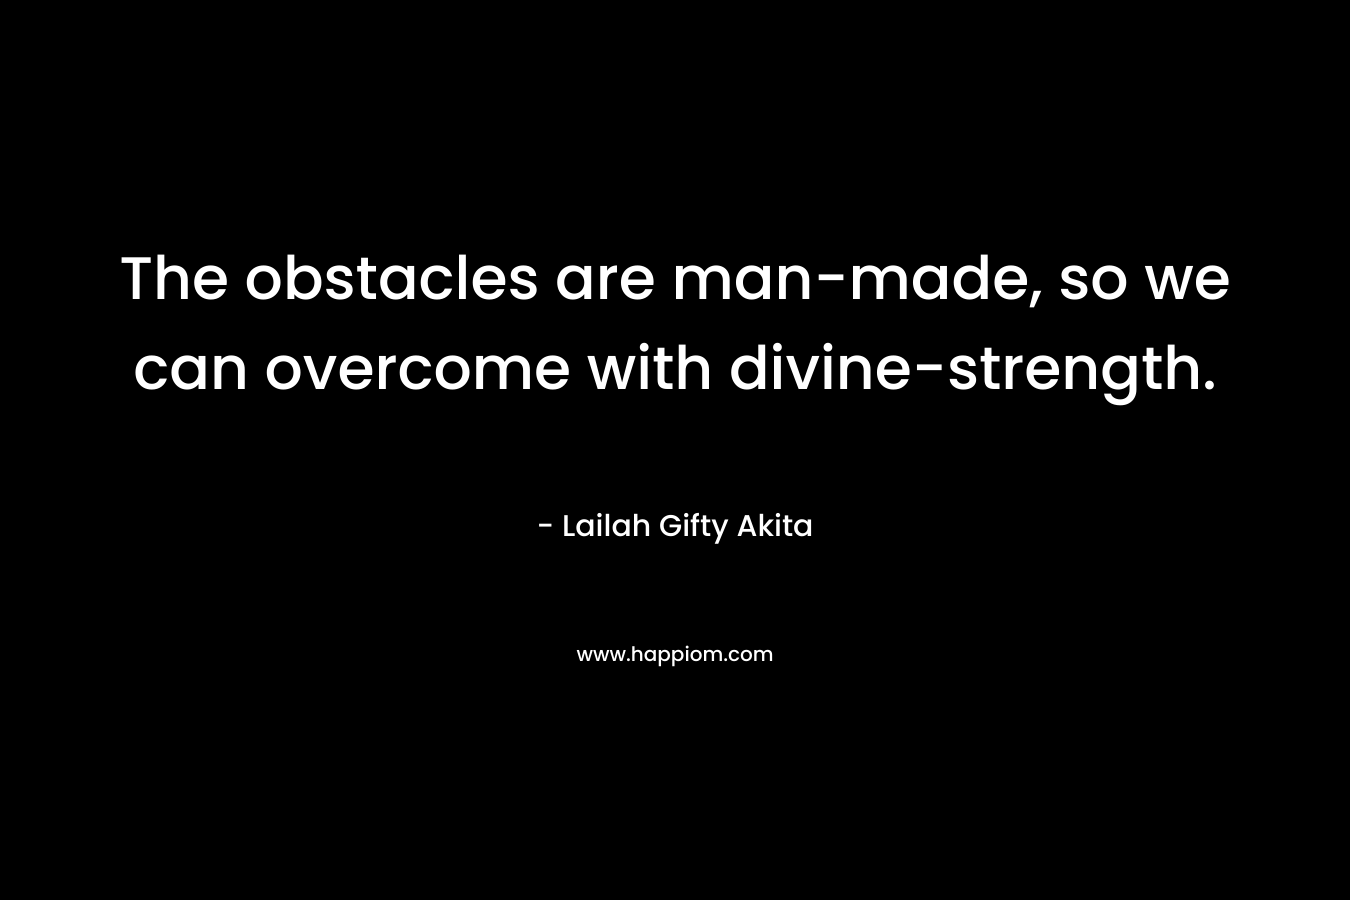 The obstacles are man-made, so we can overcome with divine-strength. – Lailah Gifty Akita